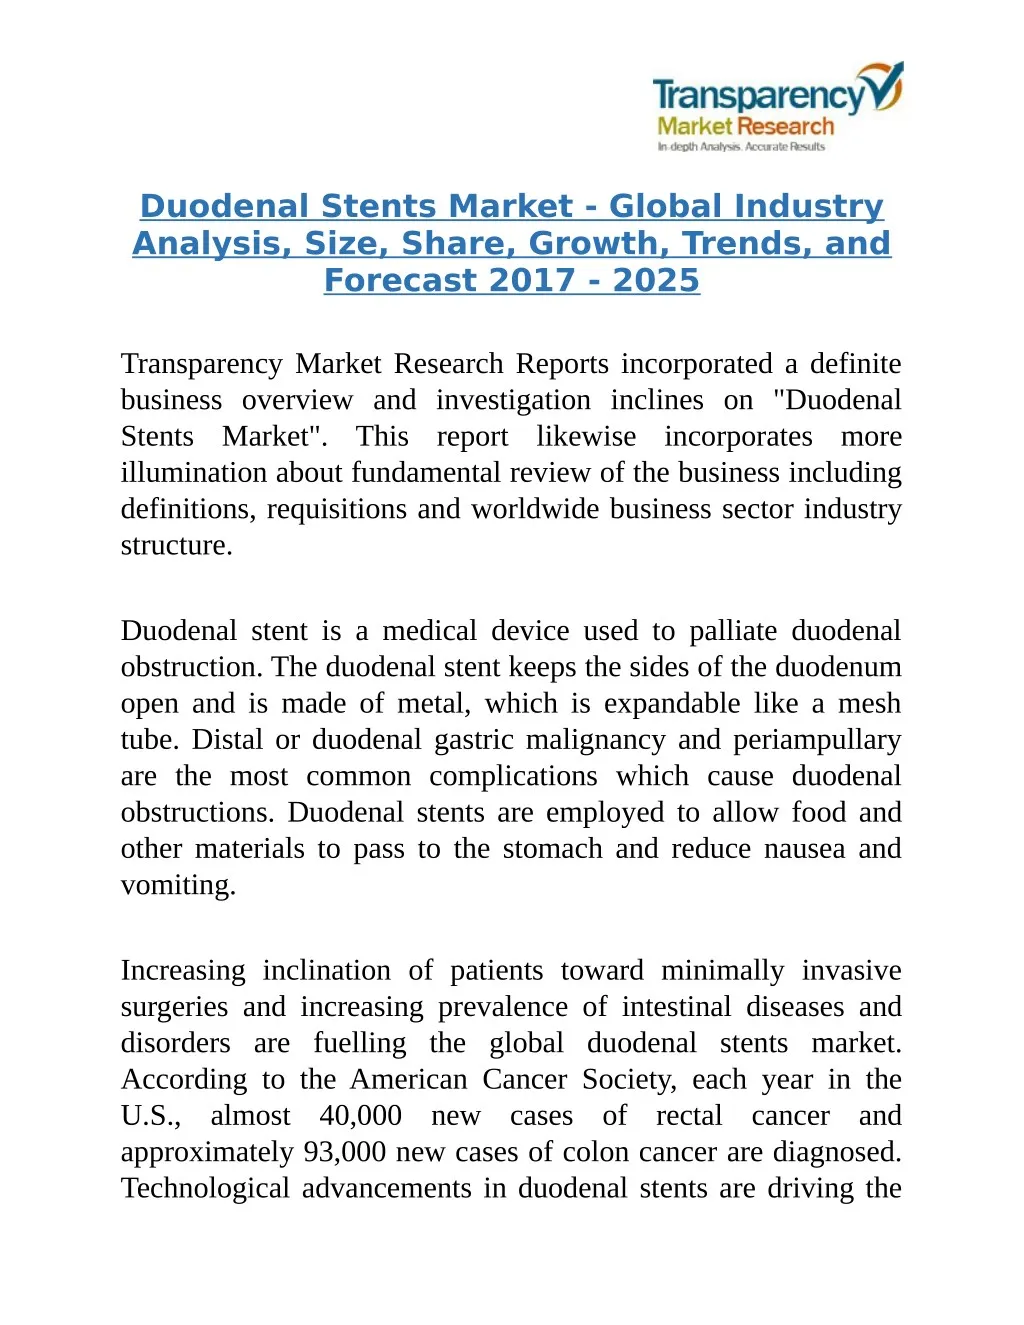 duodenal stents market global industry analysis